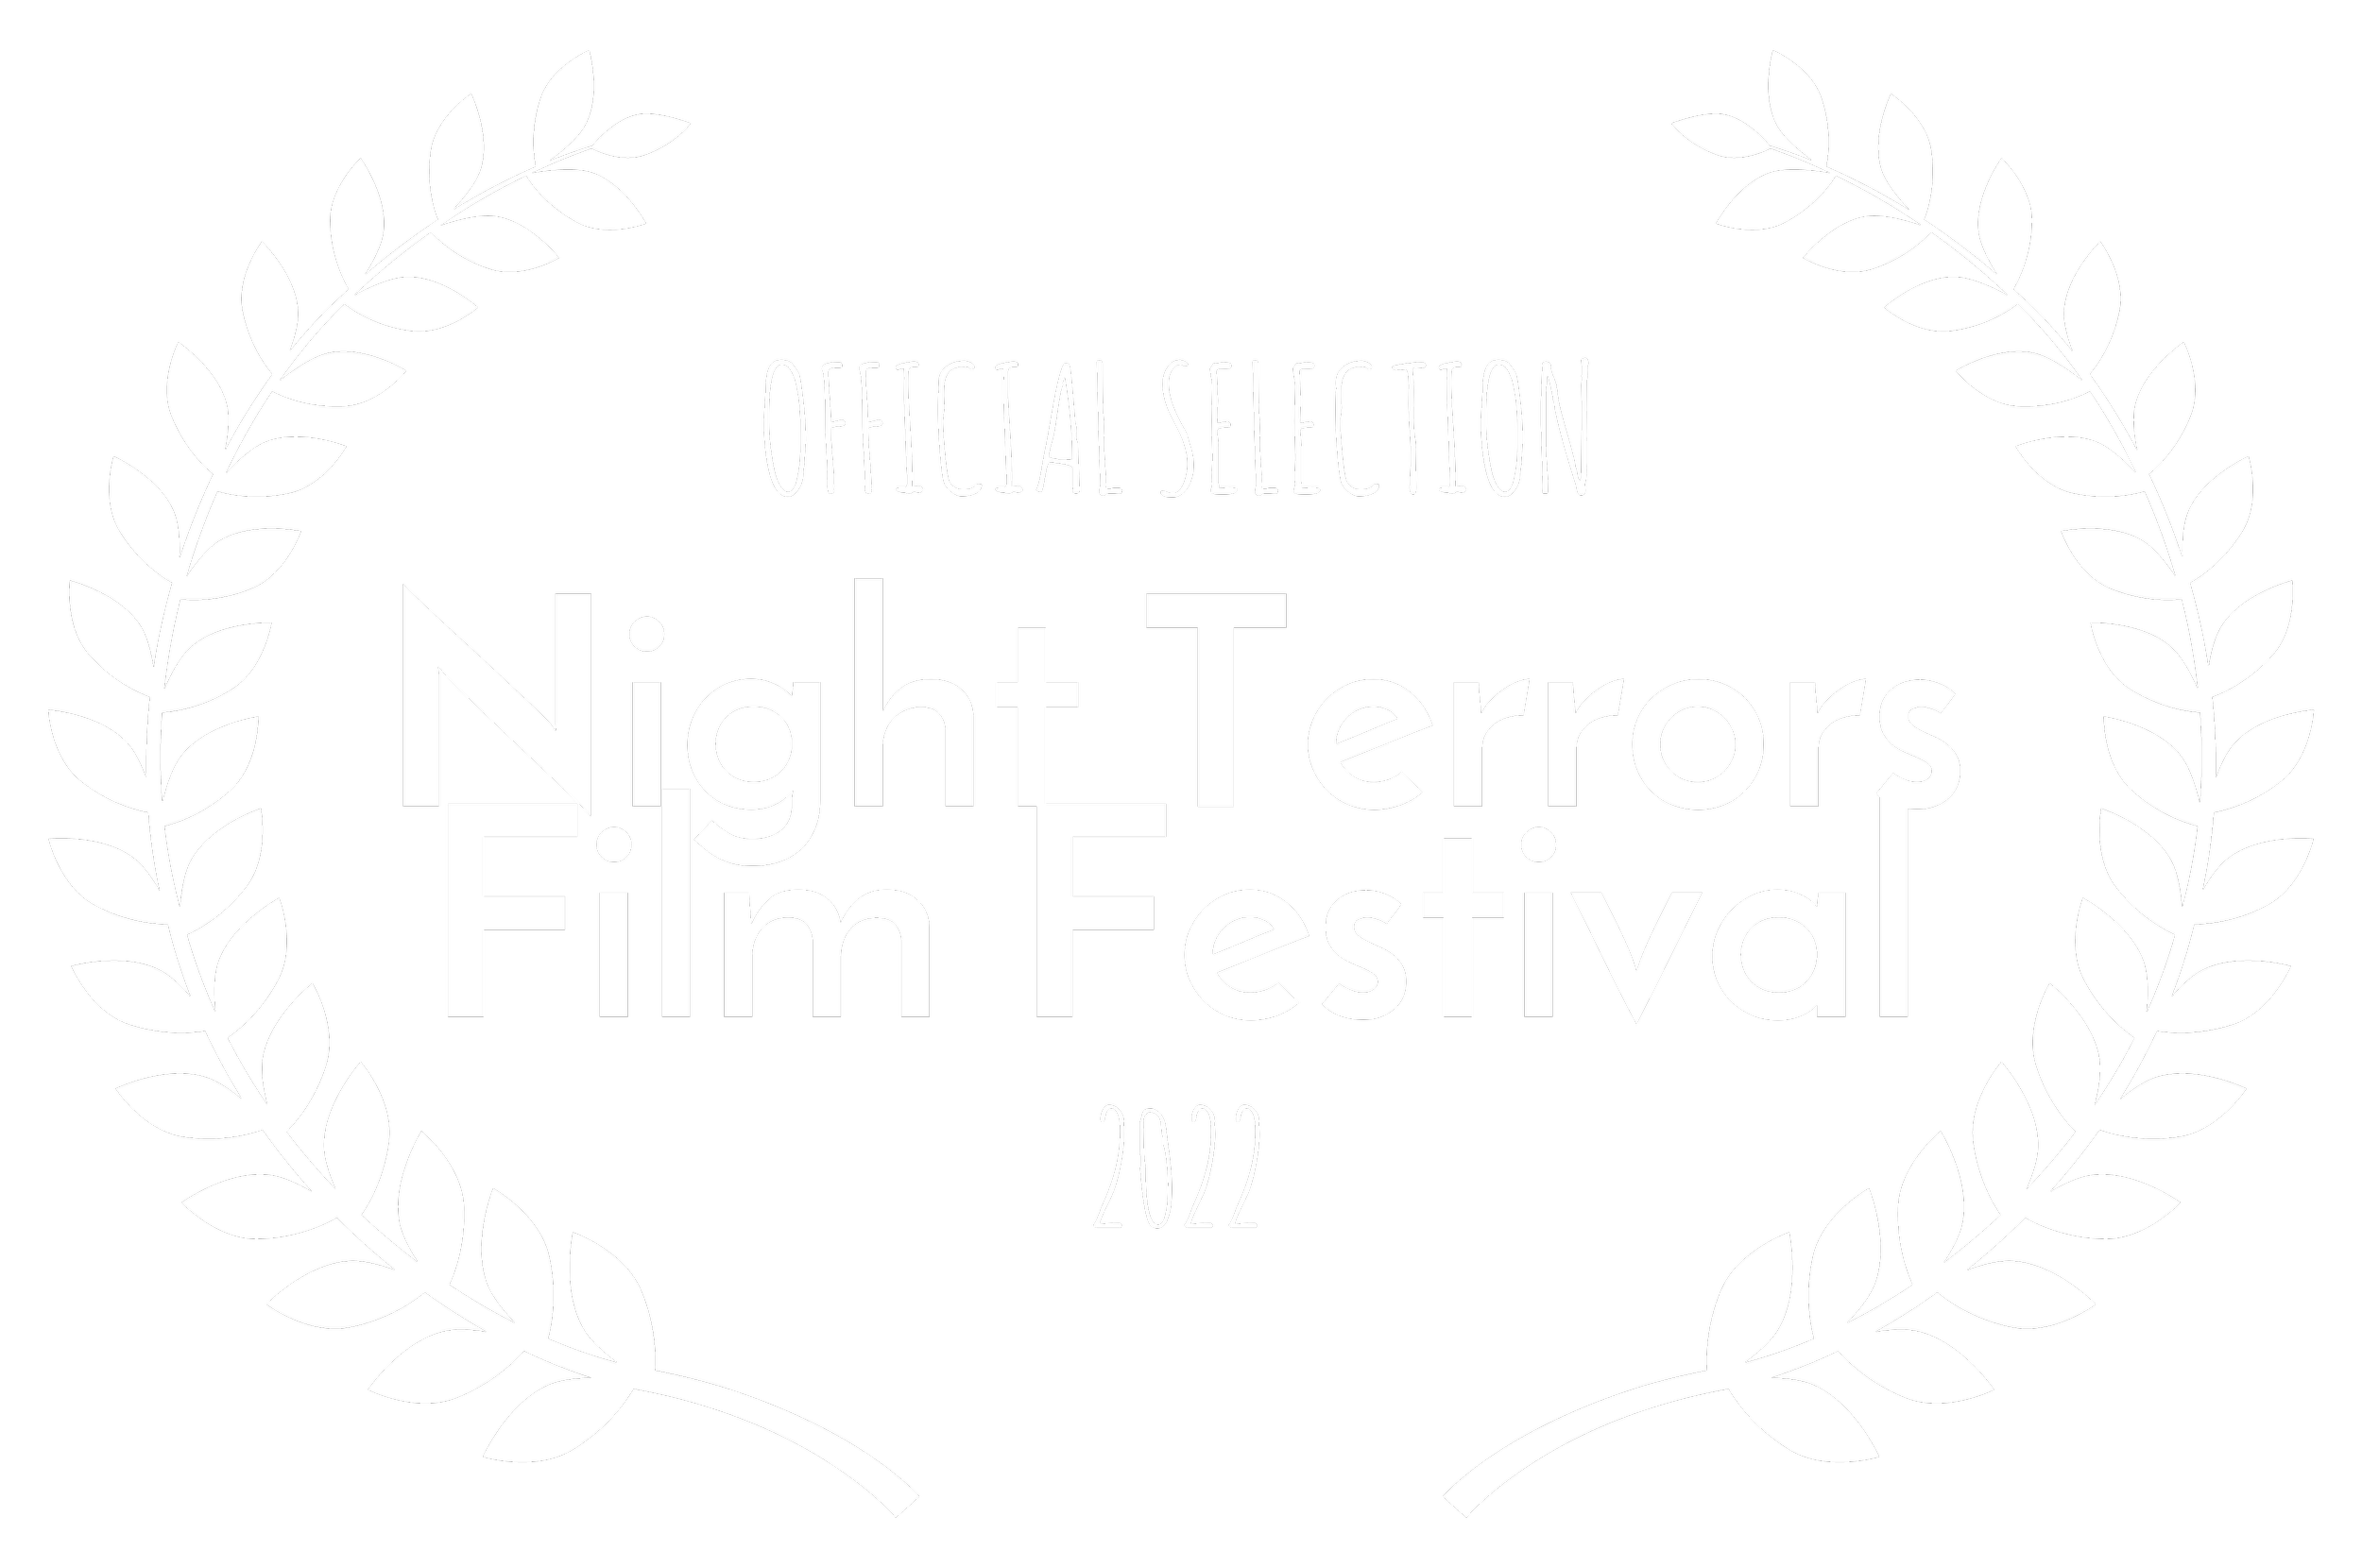 OFFICIALSELECTION-NightTerrorsFilmFestival-2022.png